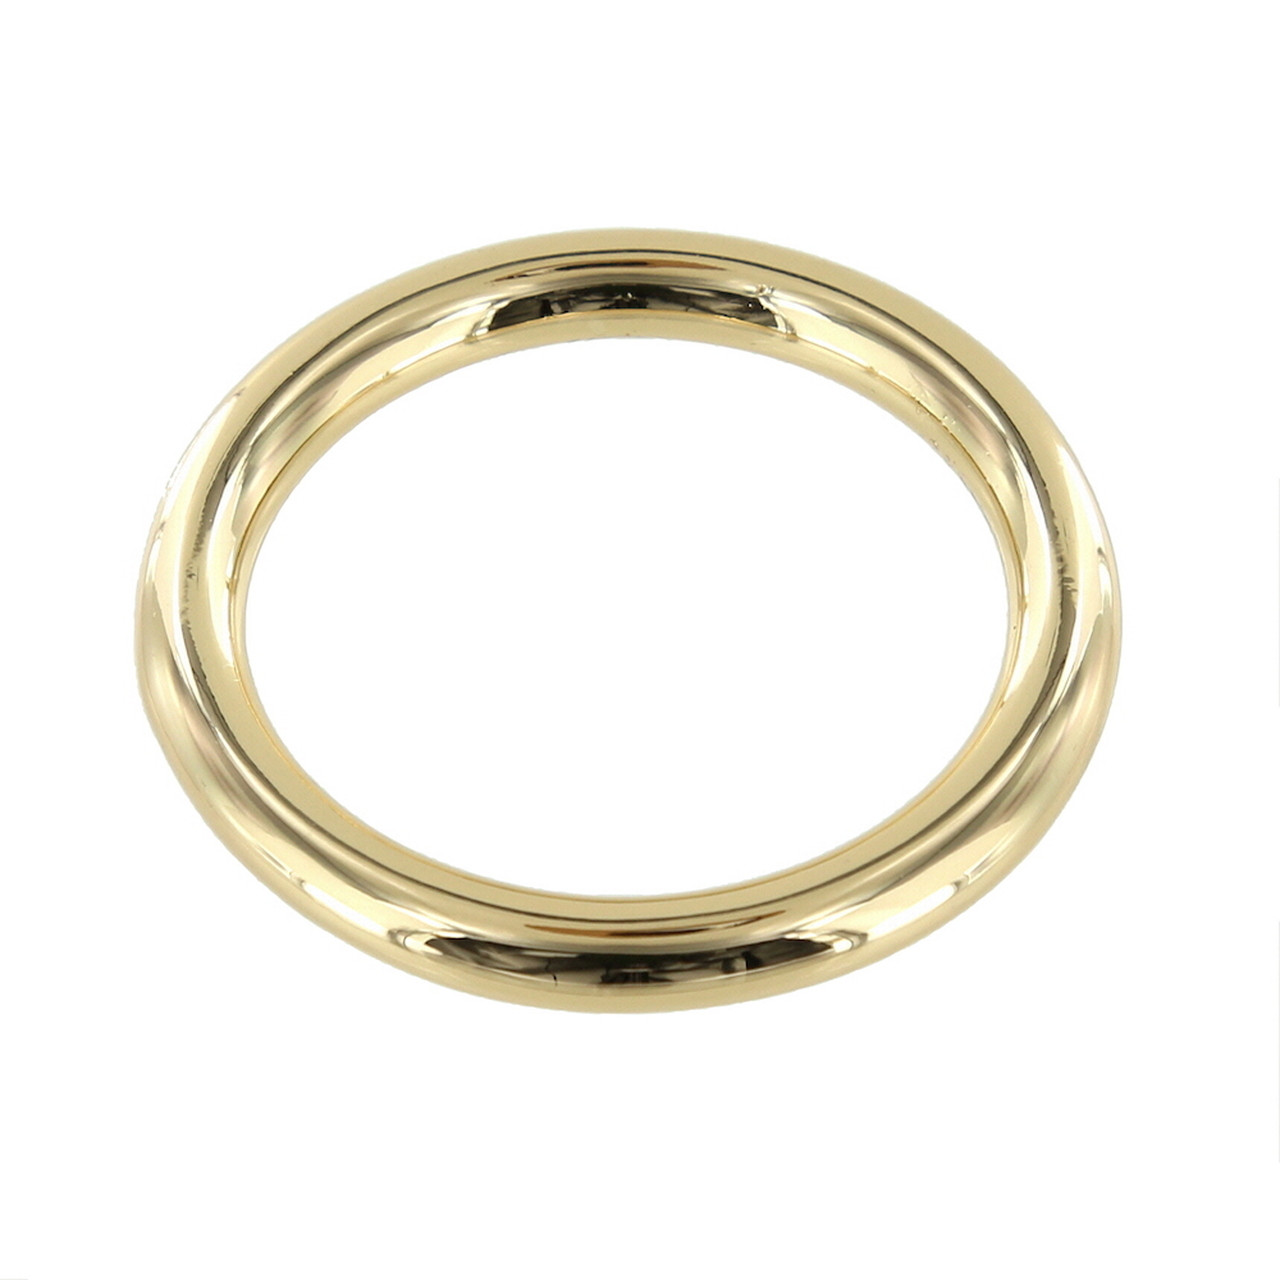 OR0 Gold Plate, Thick O-Ring, Solid Brass-LL, Multiple Sizes ...